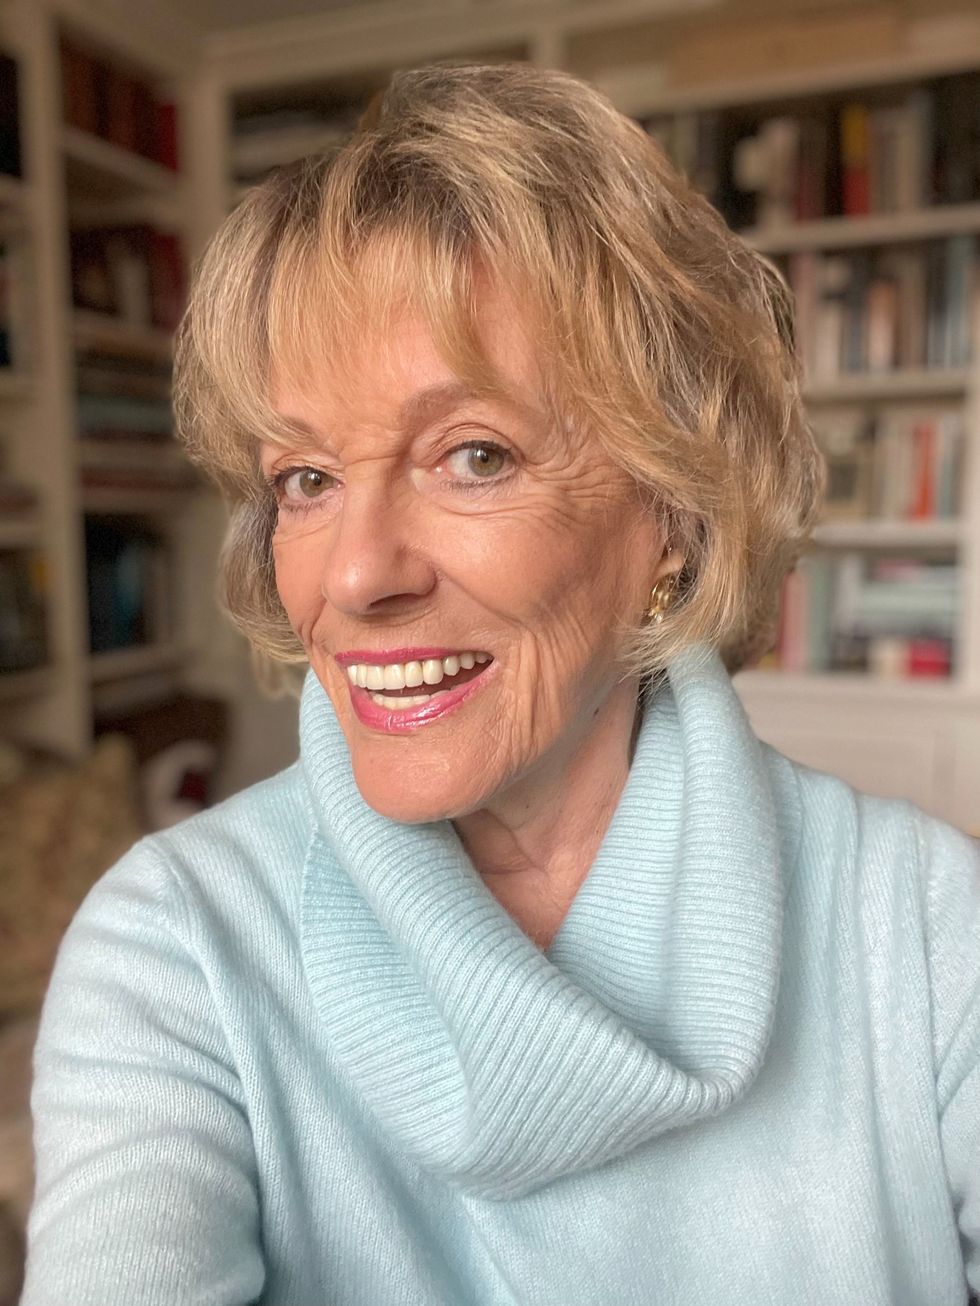 Esther Rantzen has revealed she is suffering from lung cancer, which has spread